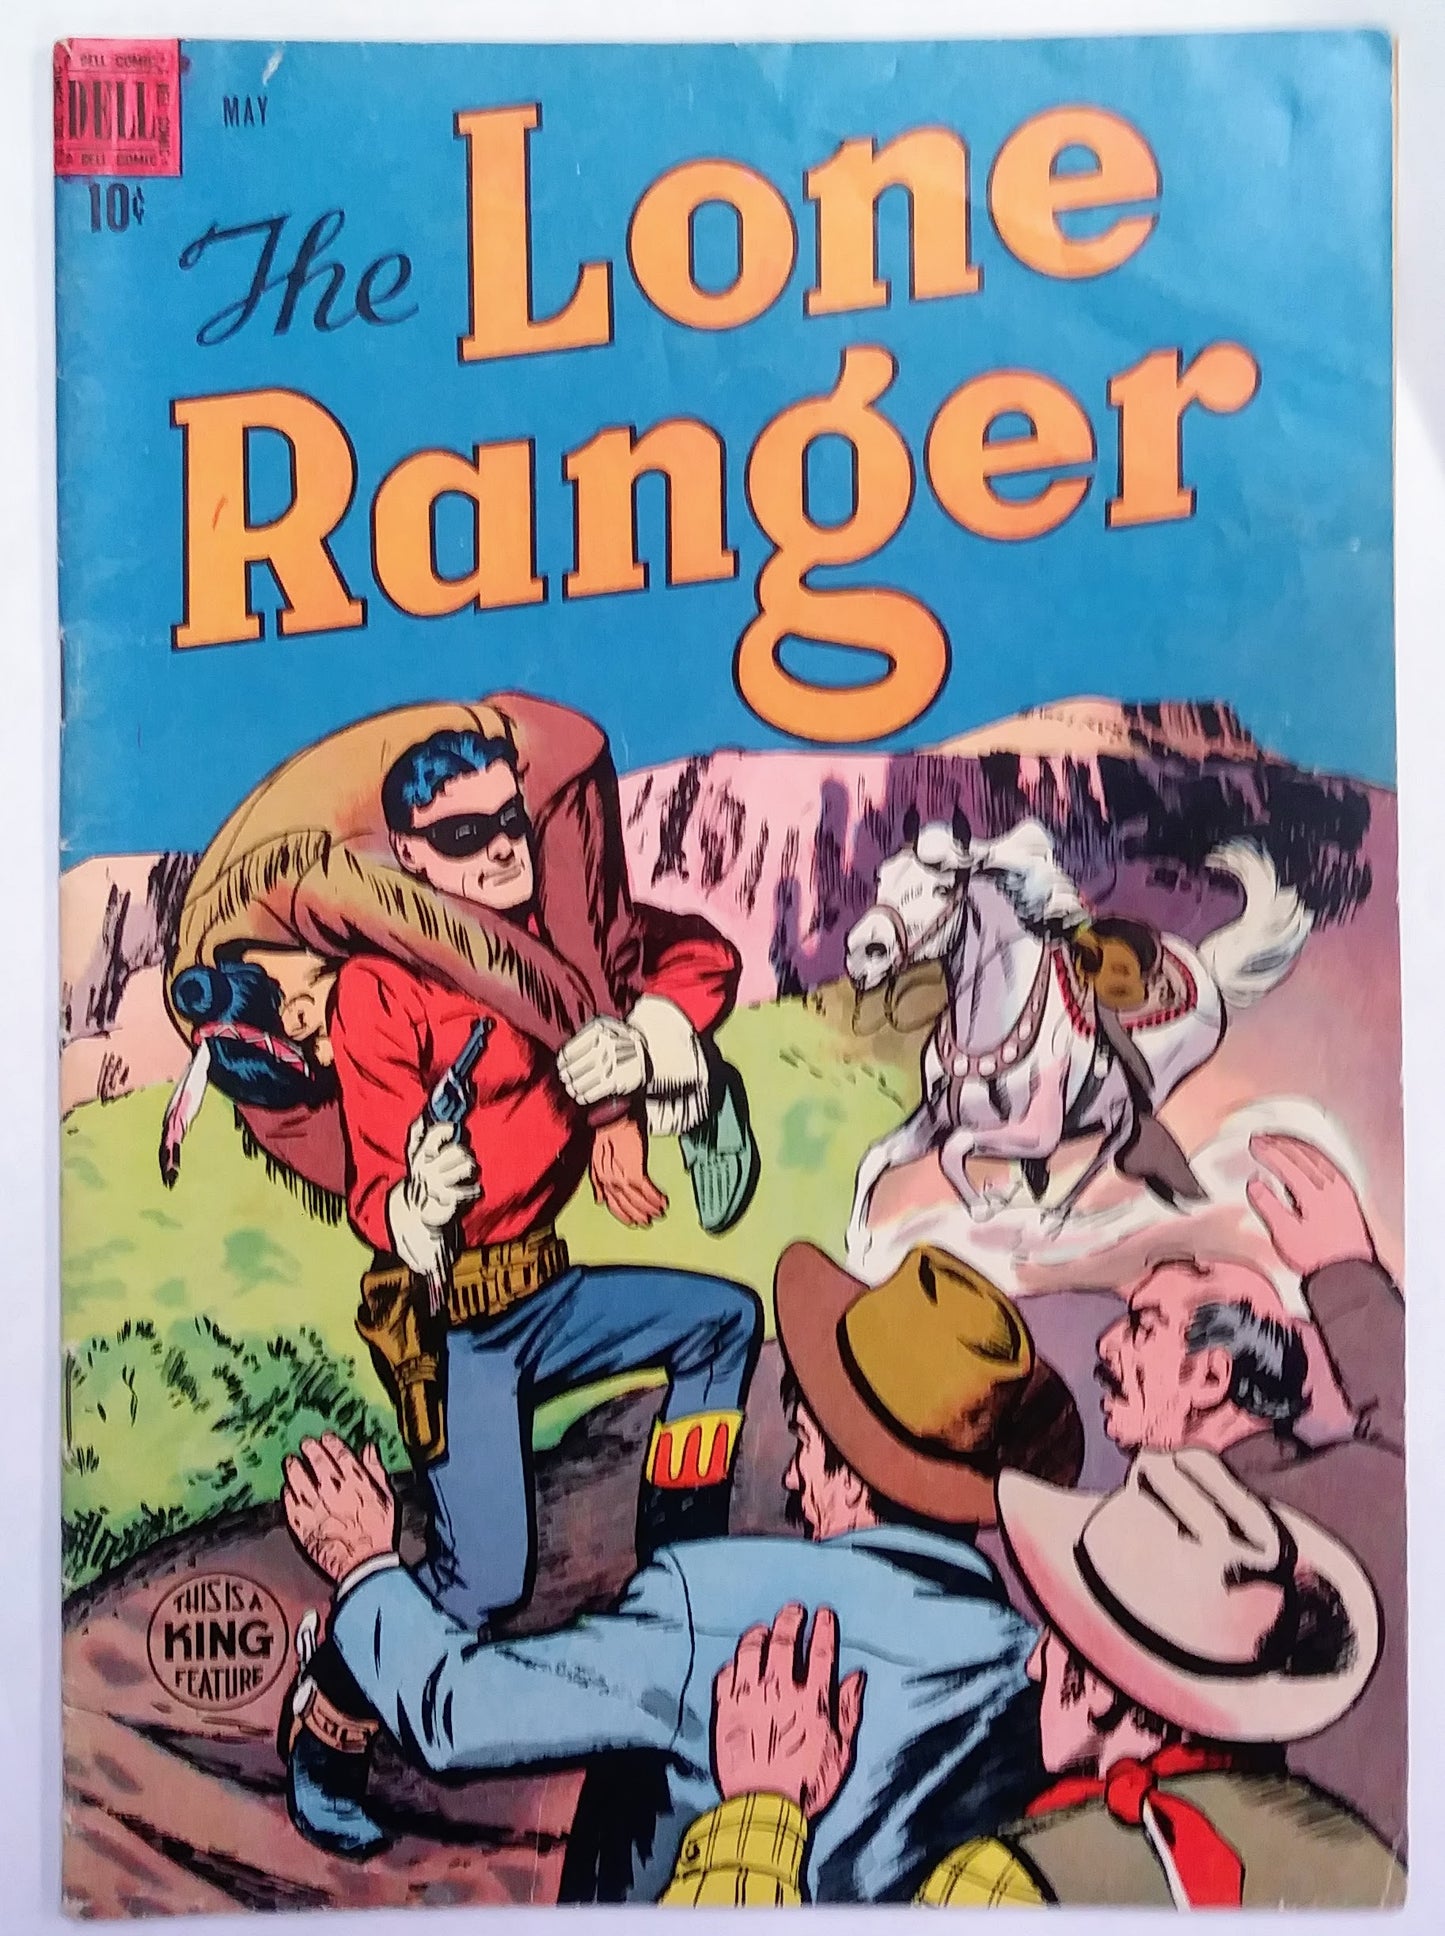 The Lone Ranger #11, Dell Comics (May 1949)